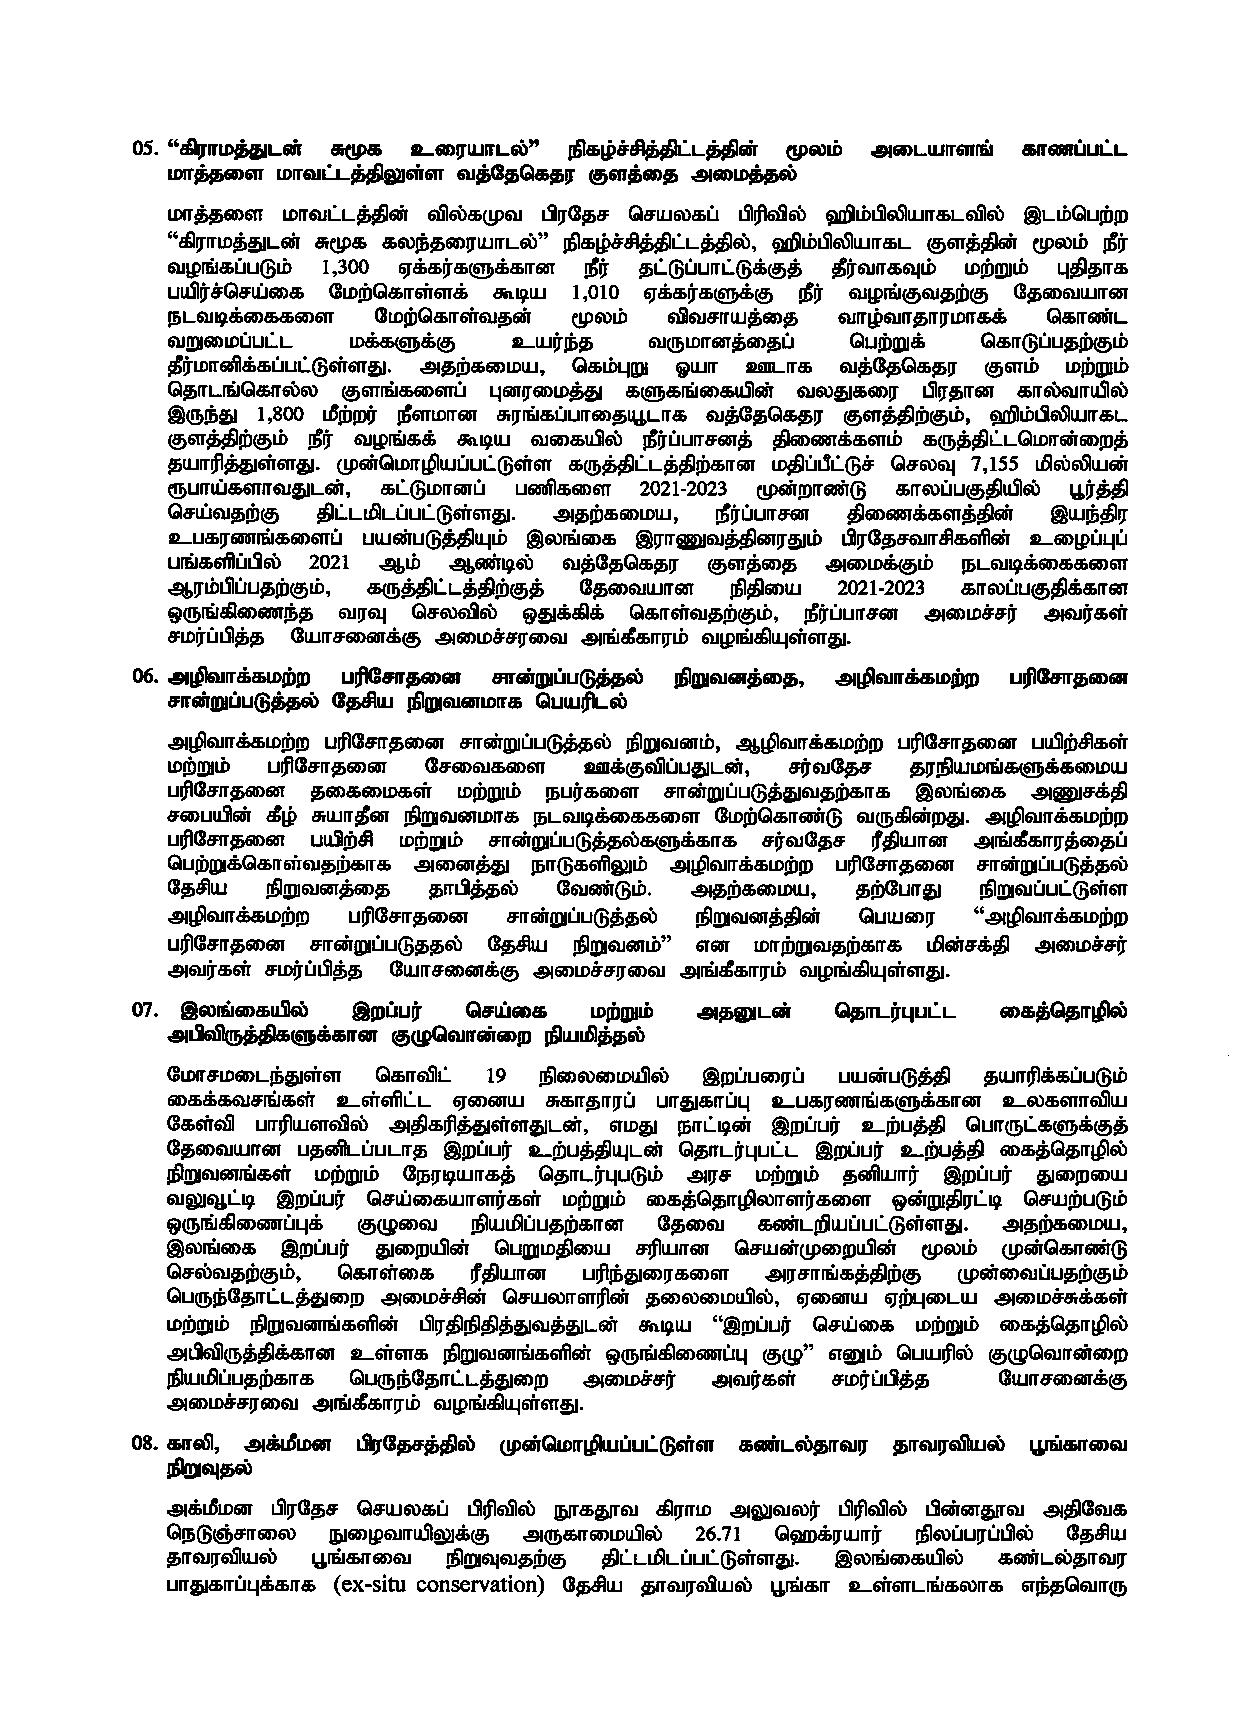 Cabinet Decision on 01.03.2021 Tamil page 002